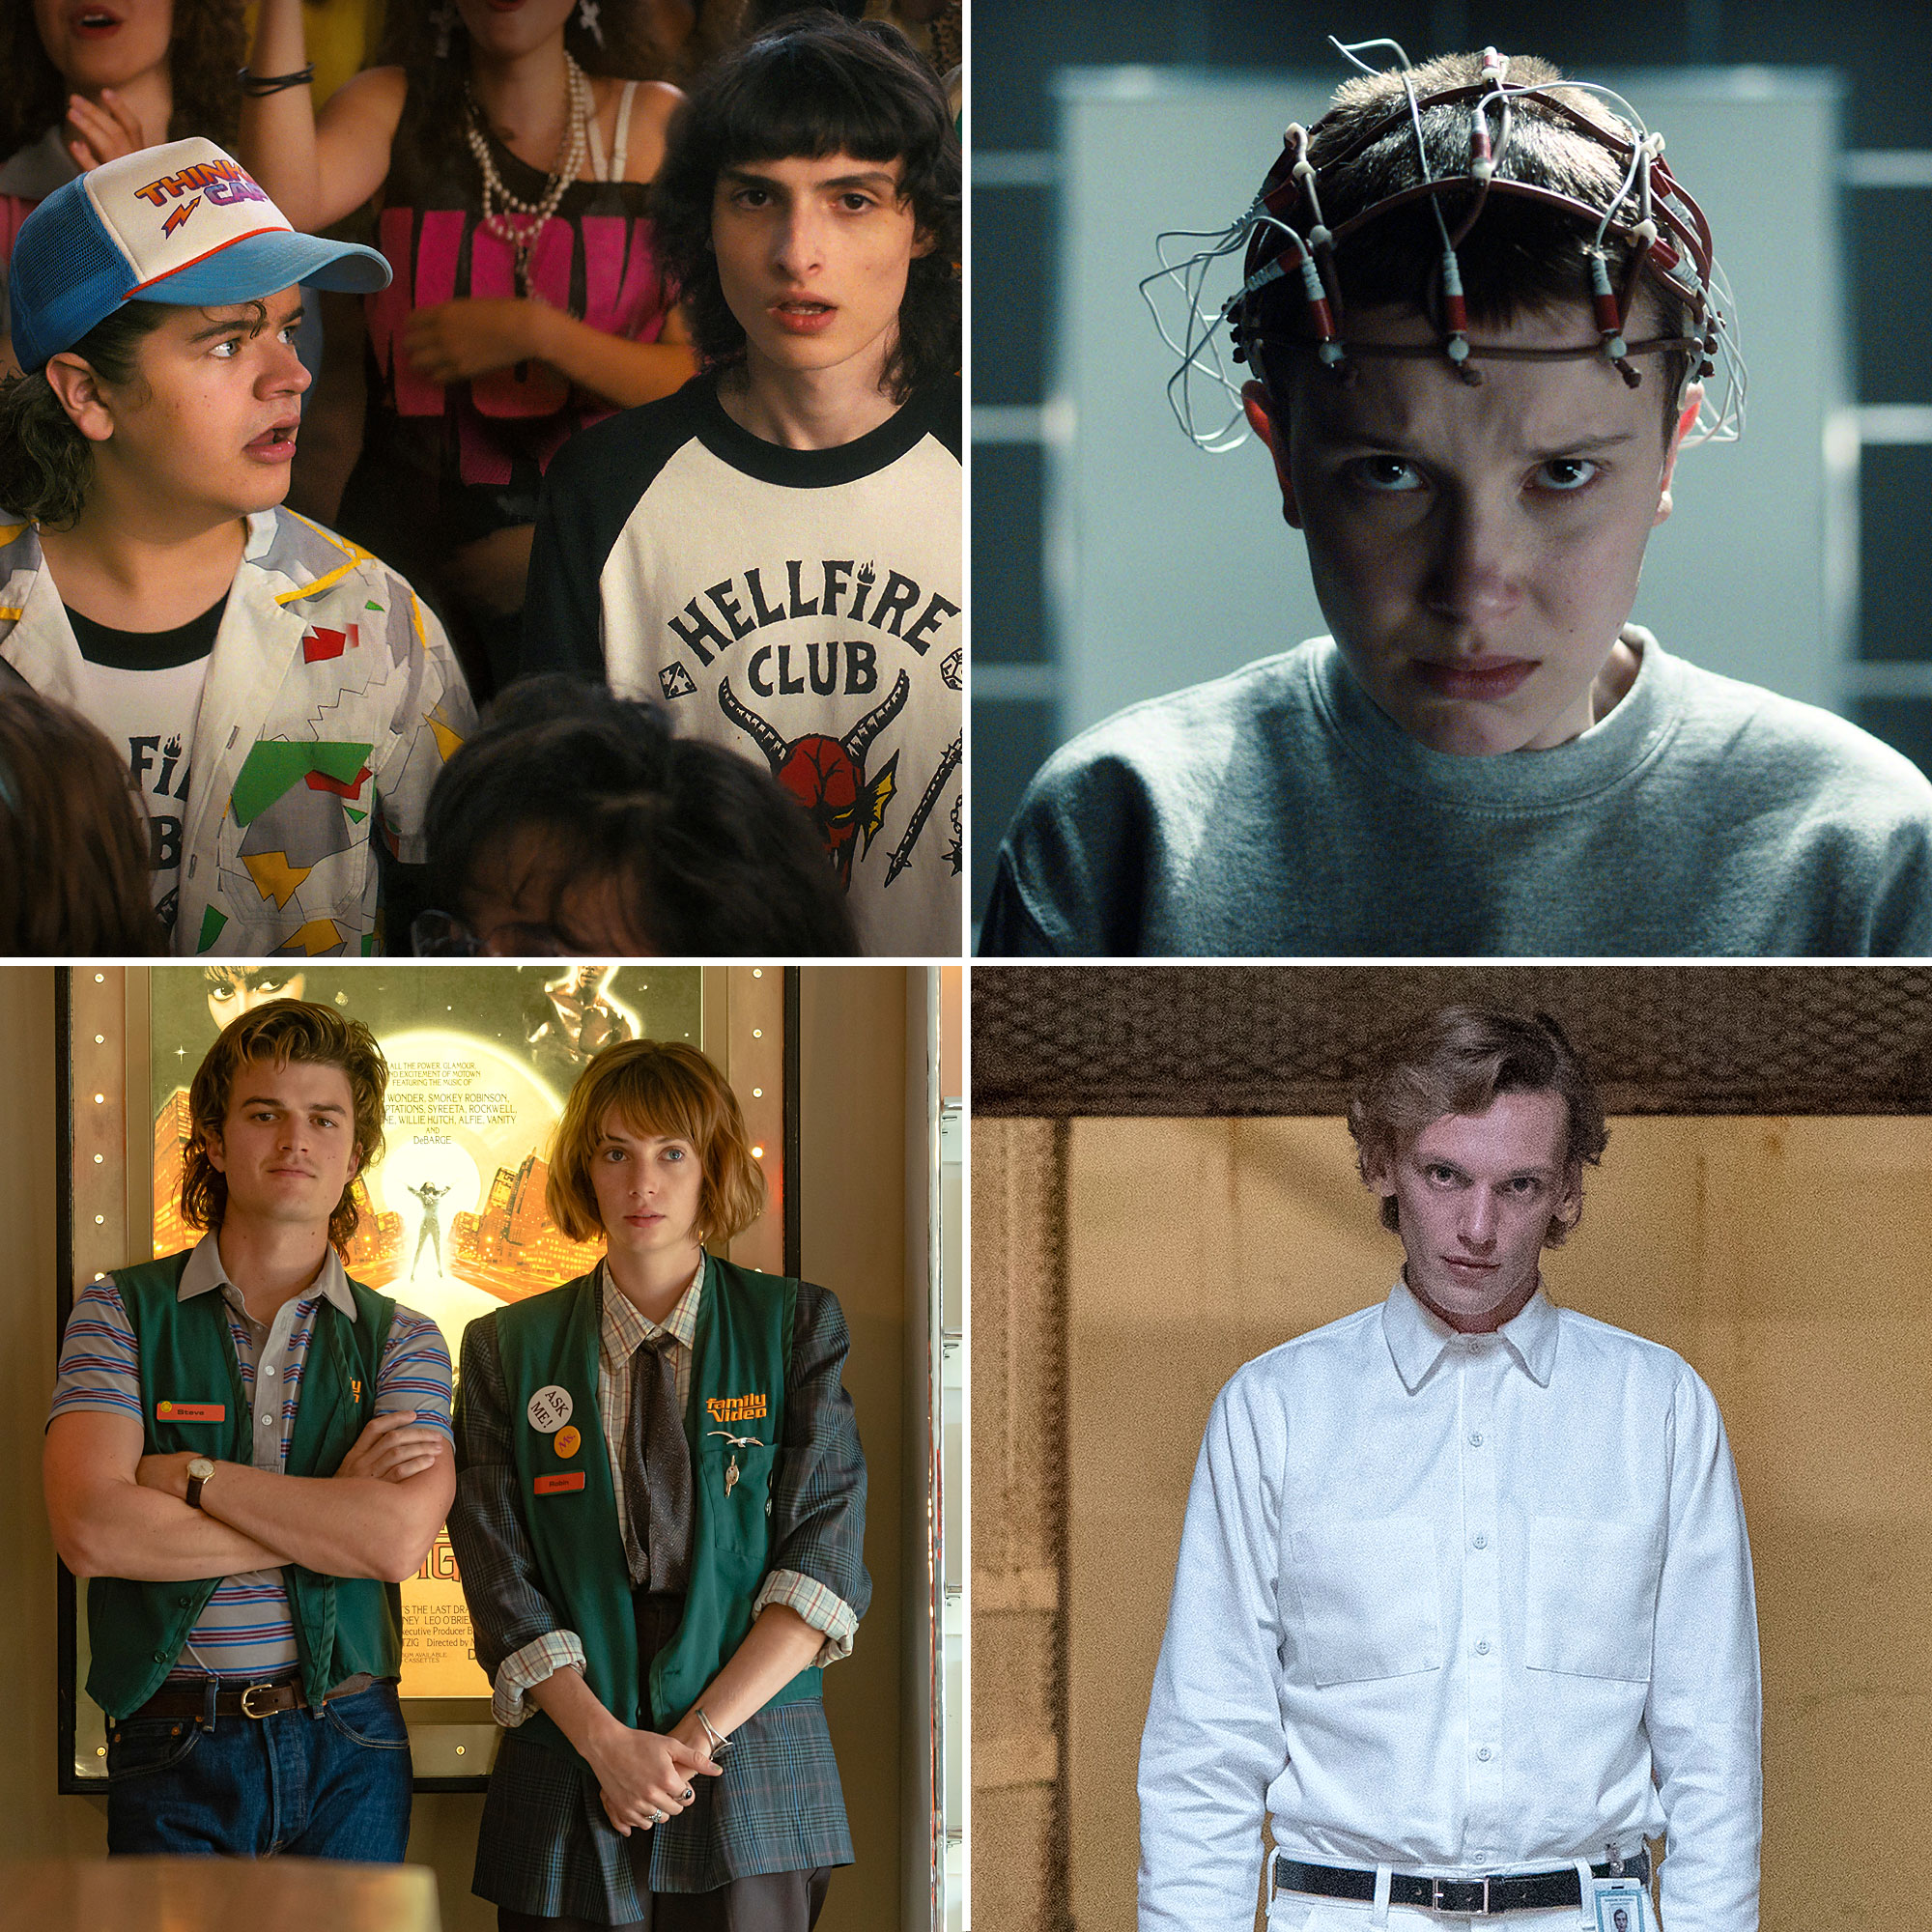 Stranger Things': How to Get Cast Netflix's Hit Series